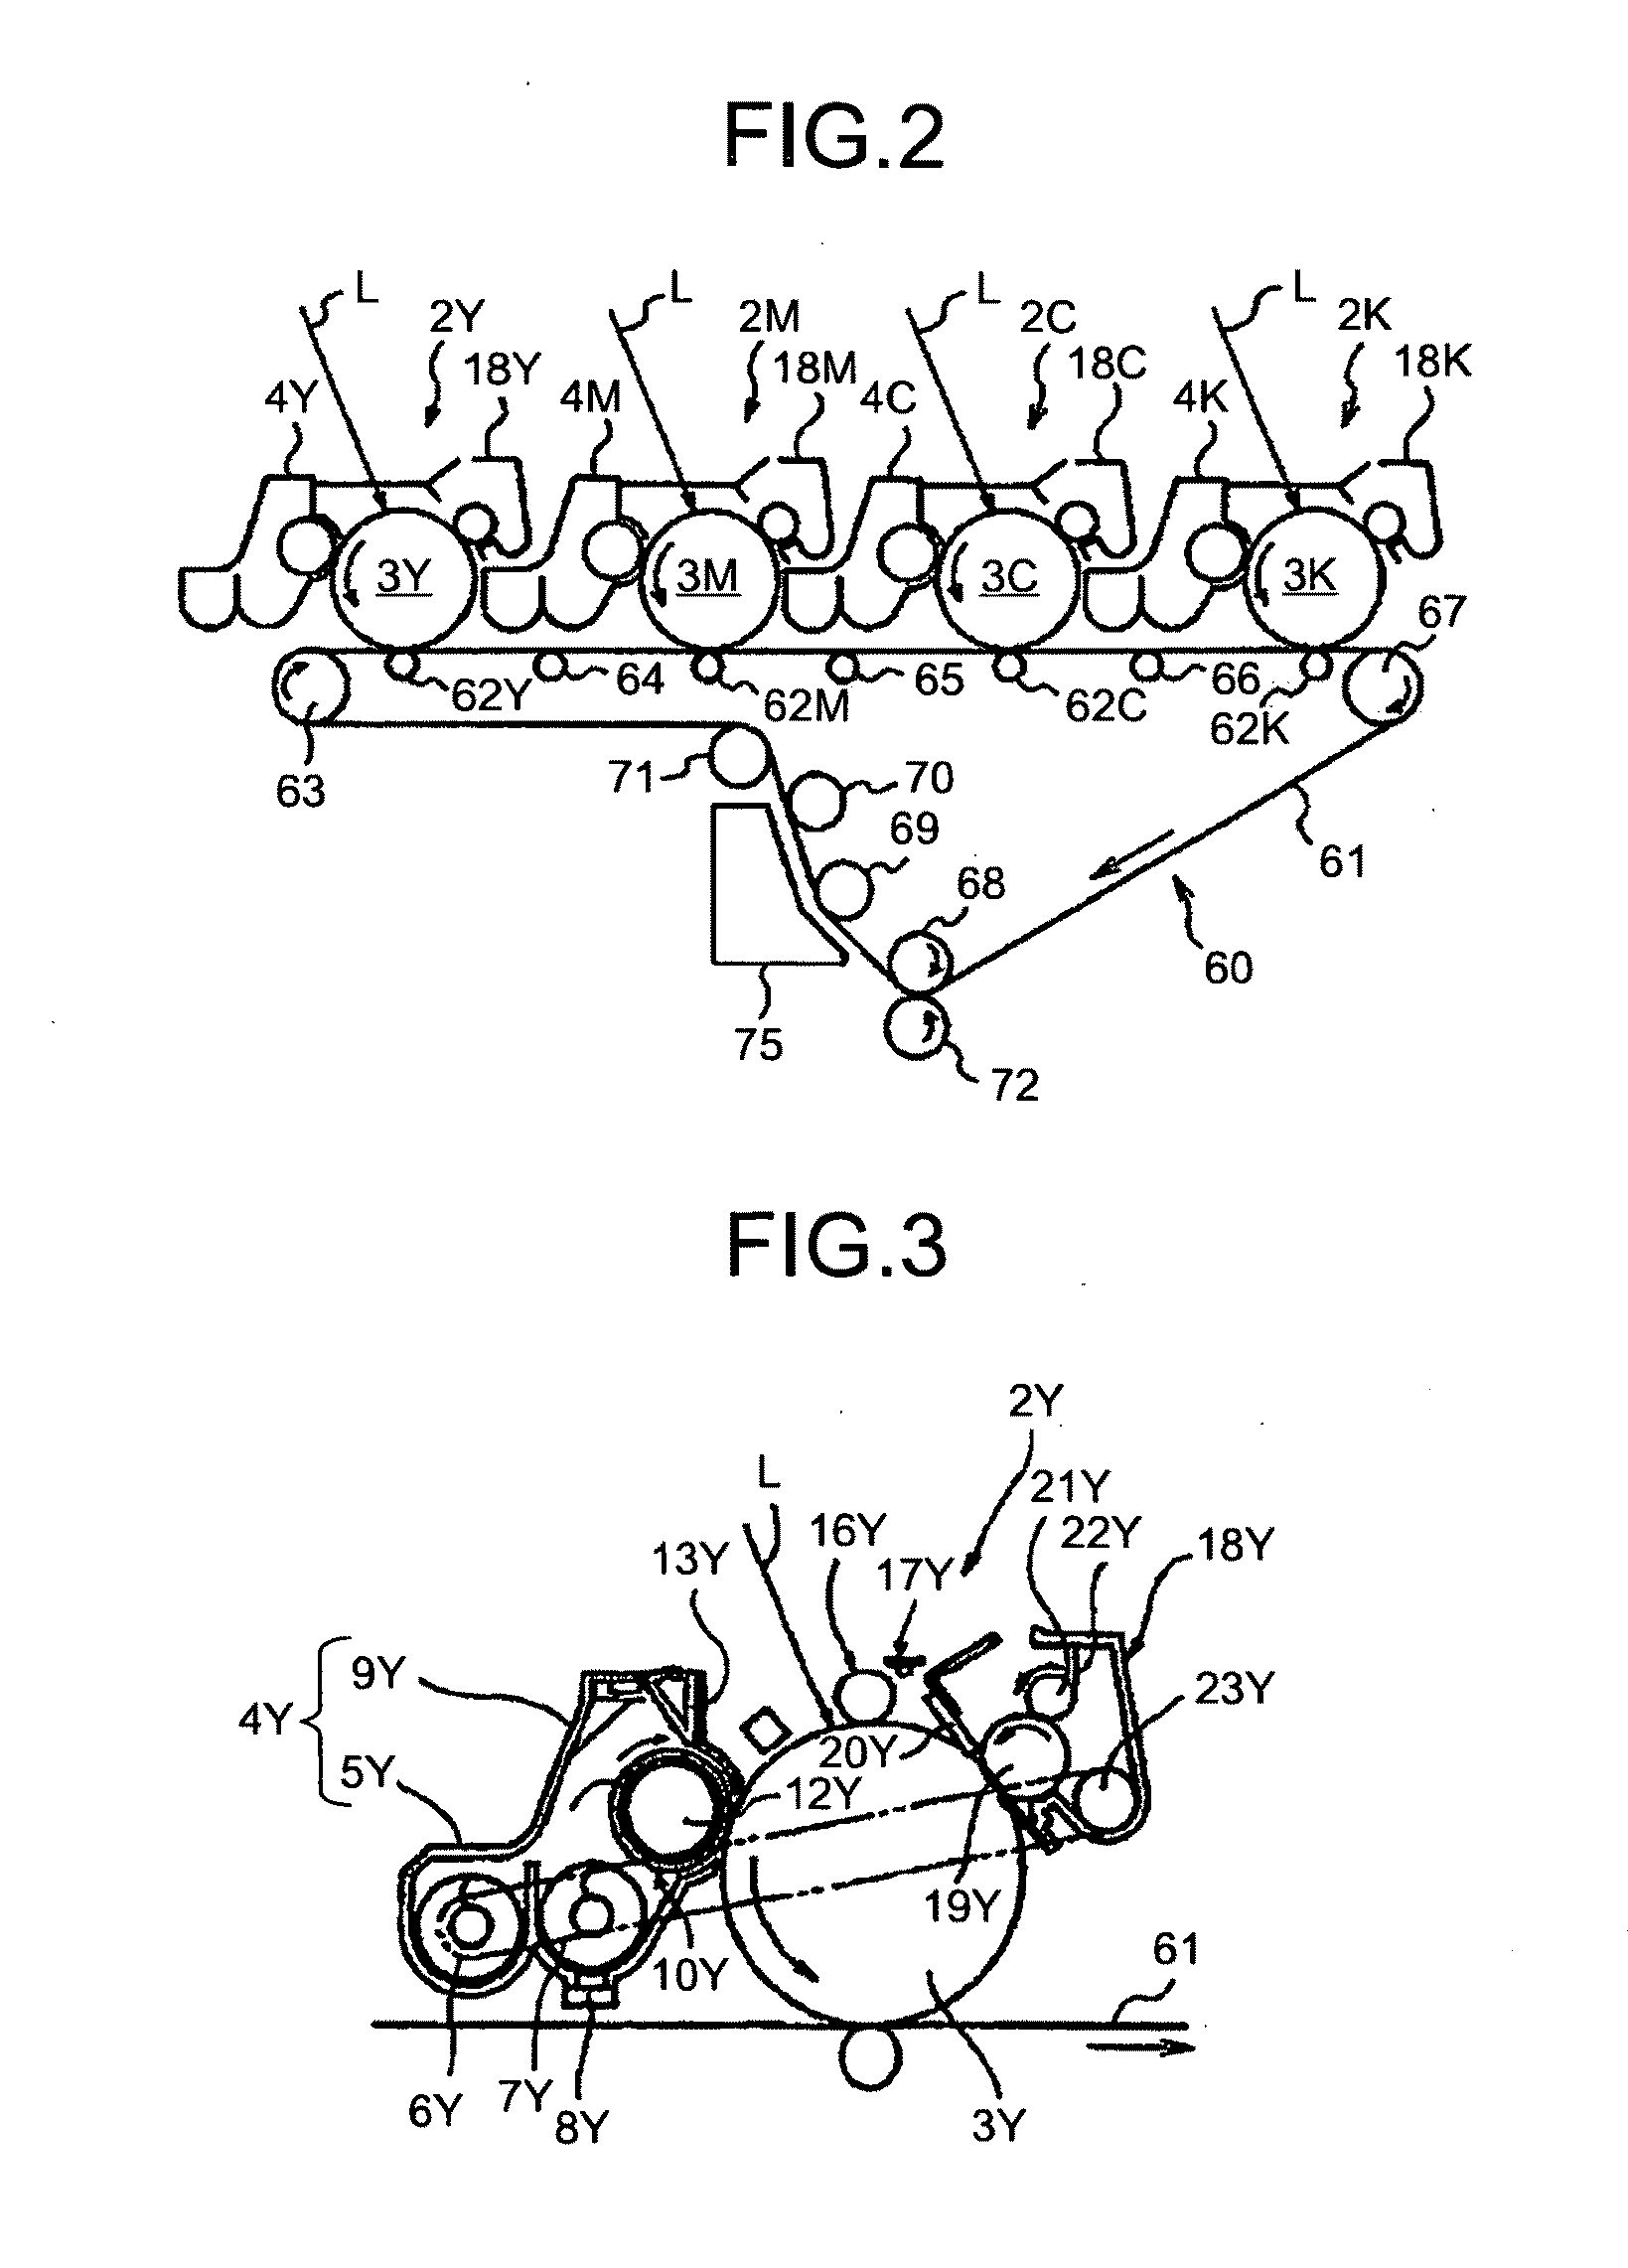 Image processing apparatus, image processing system, and image processing method